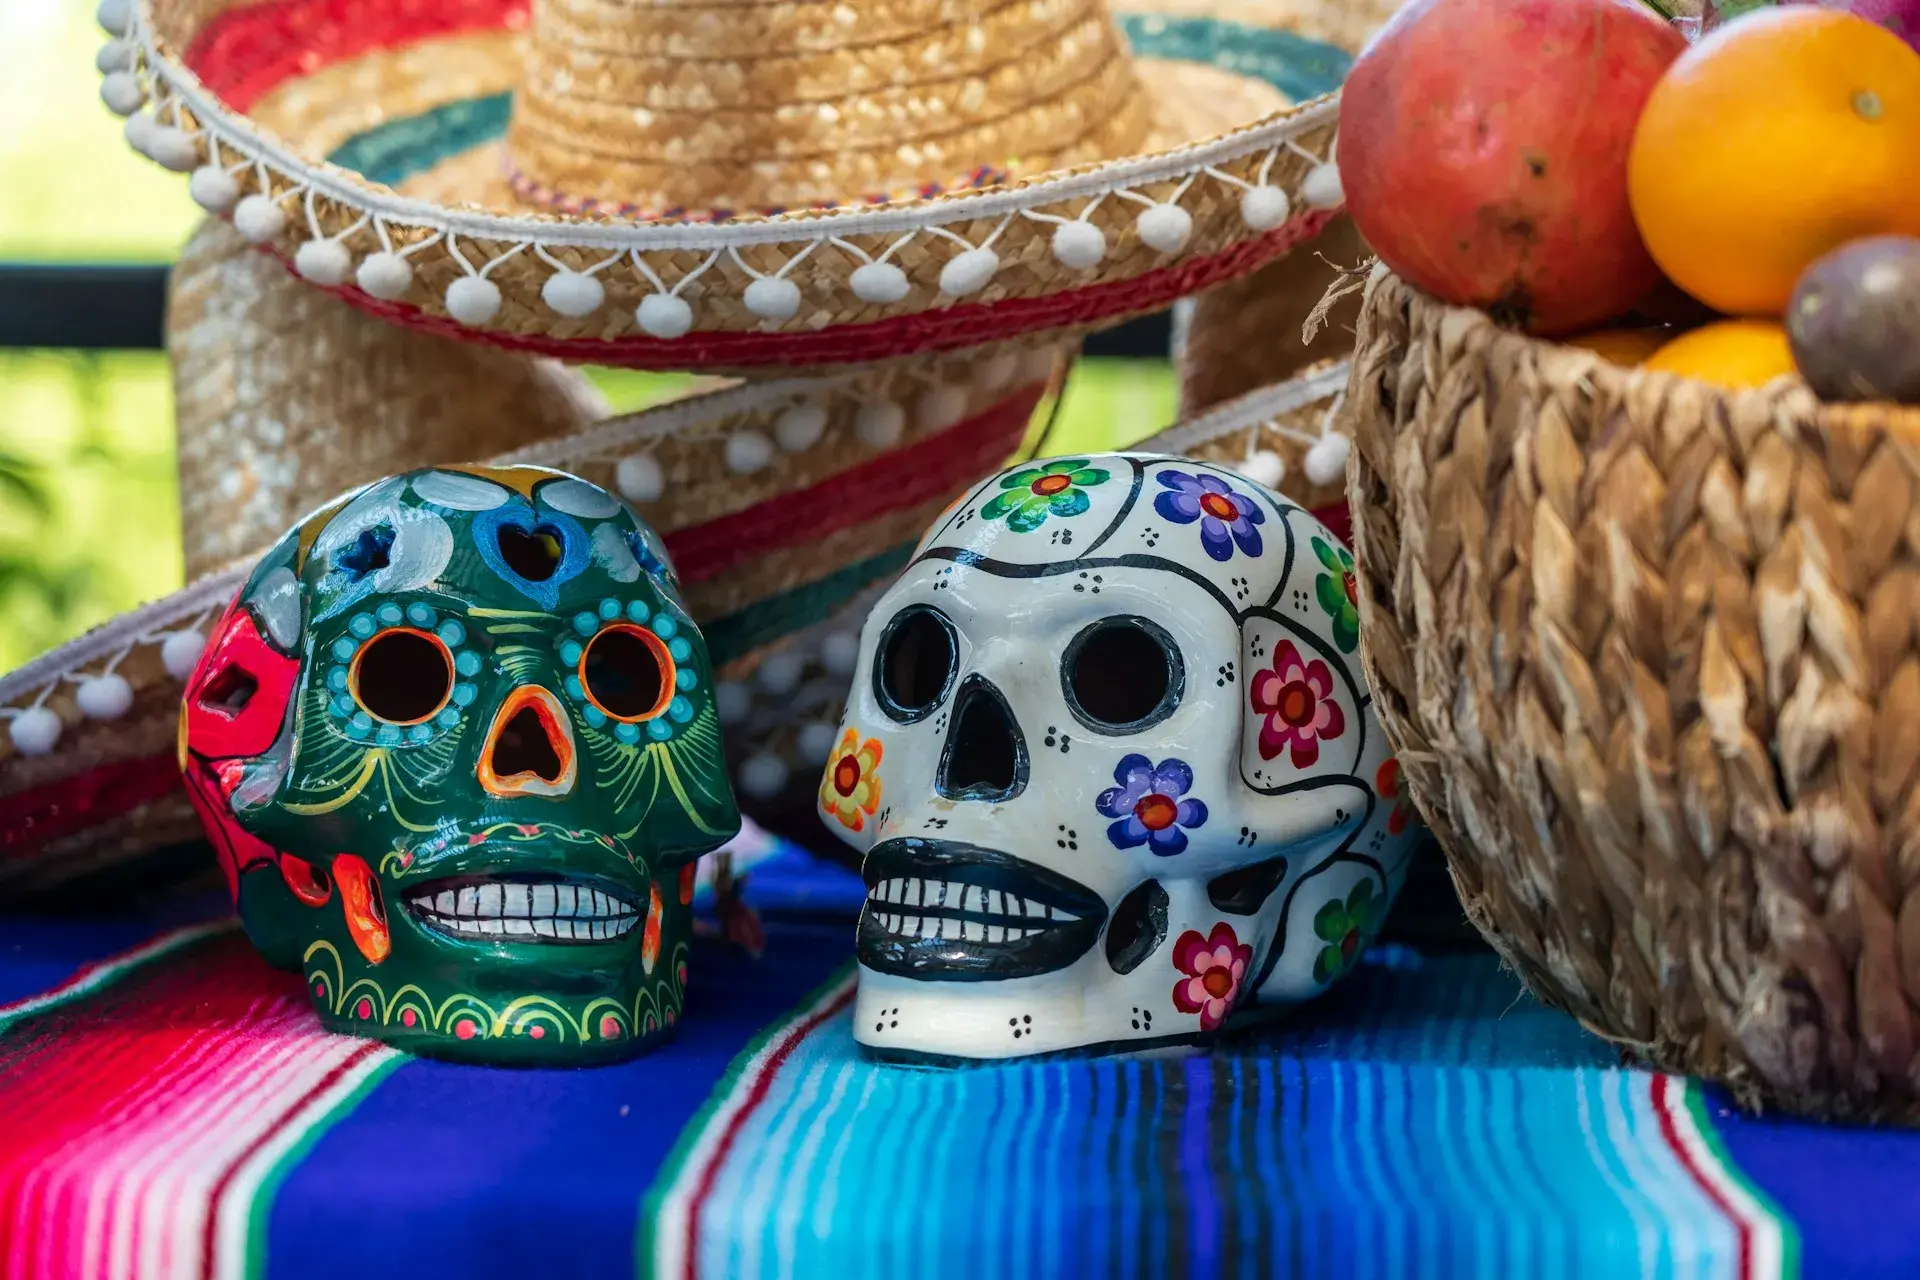 why is day of the dead a joyous occasion for mexican culture